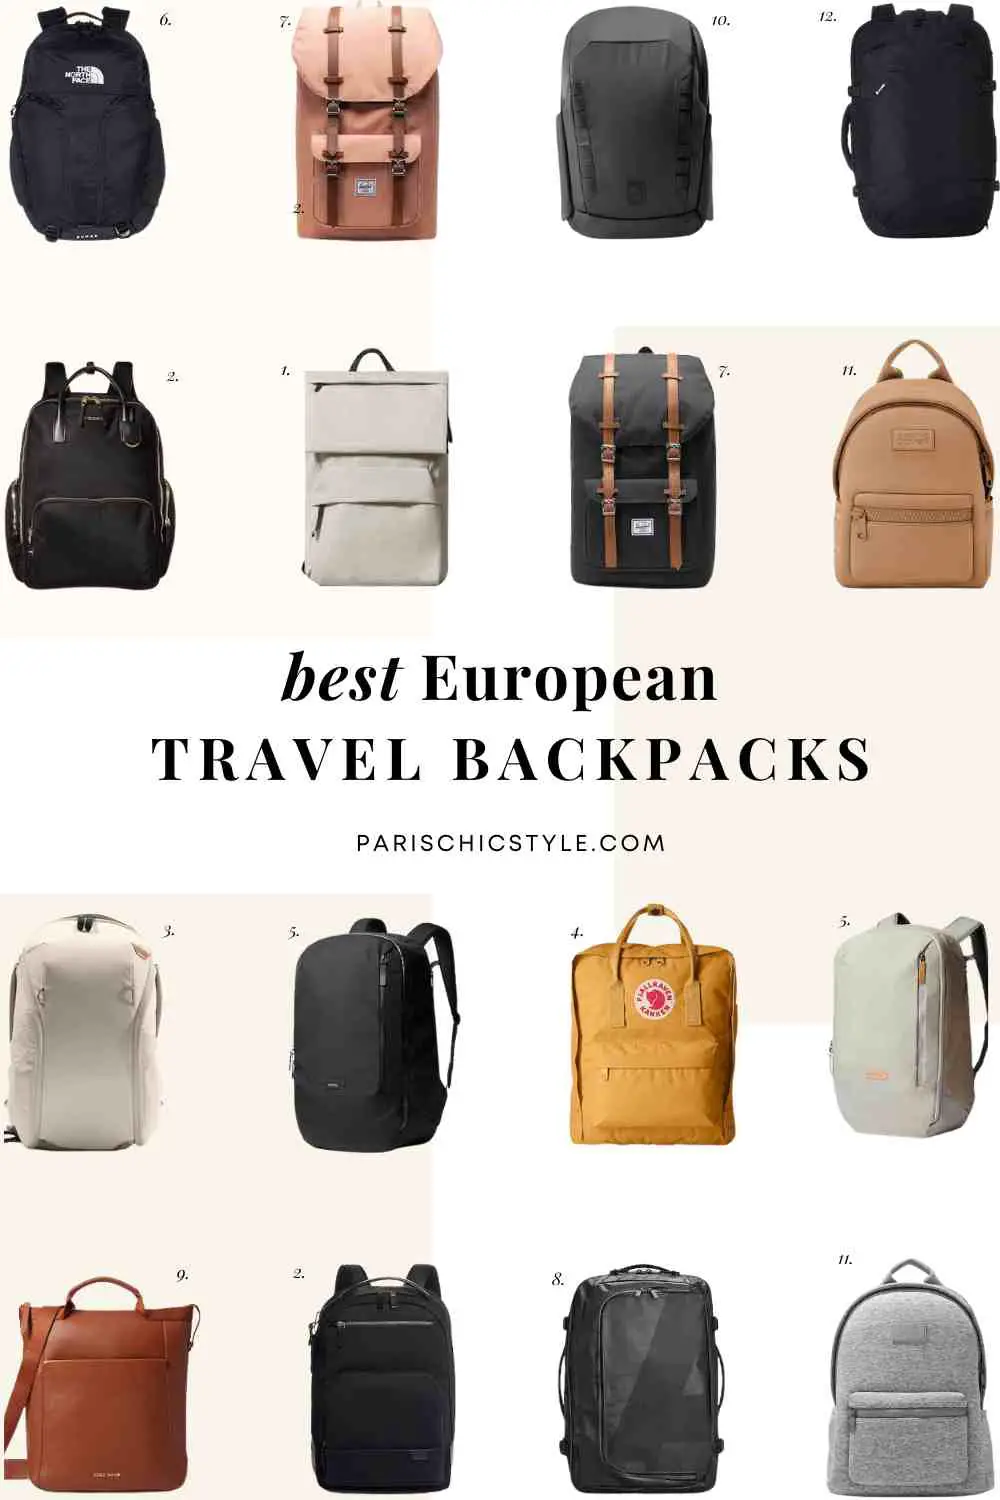 Best European Travel Backpack Stylish Digital Nomad Backpack For Europe Paris Chic Style